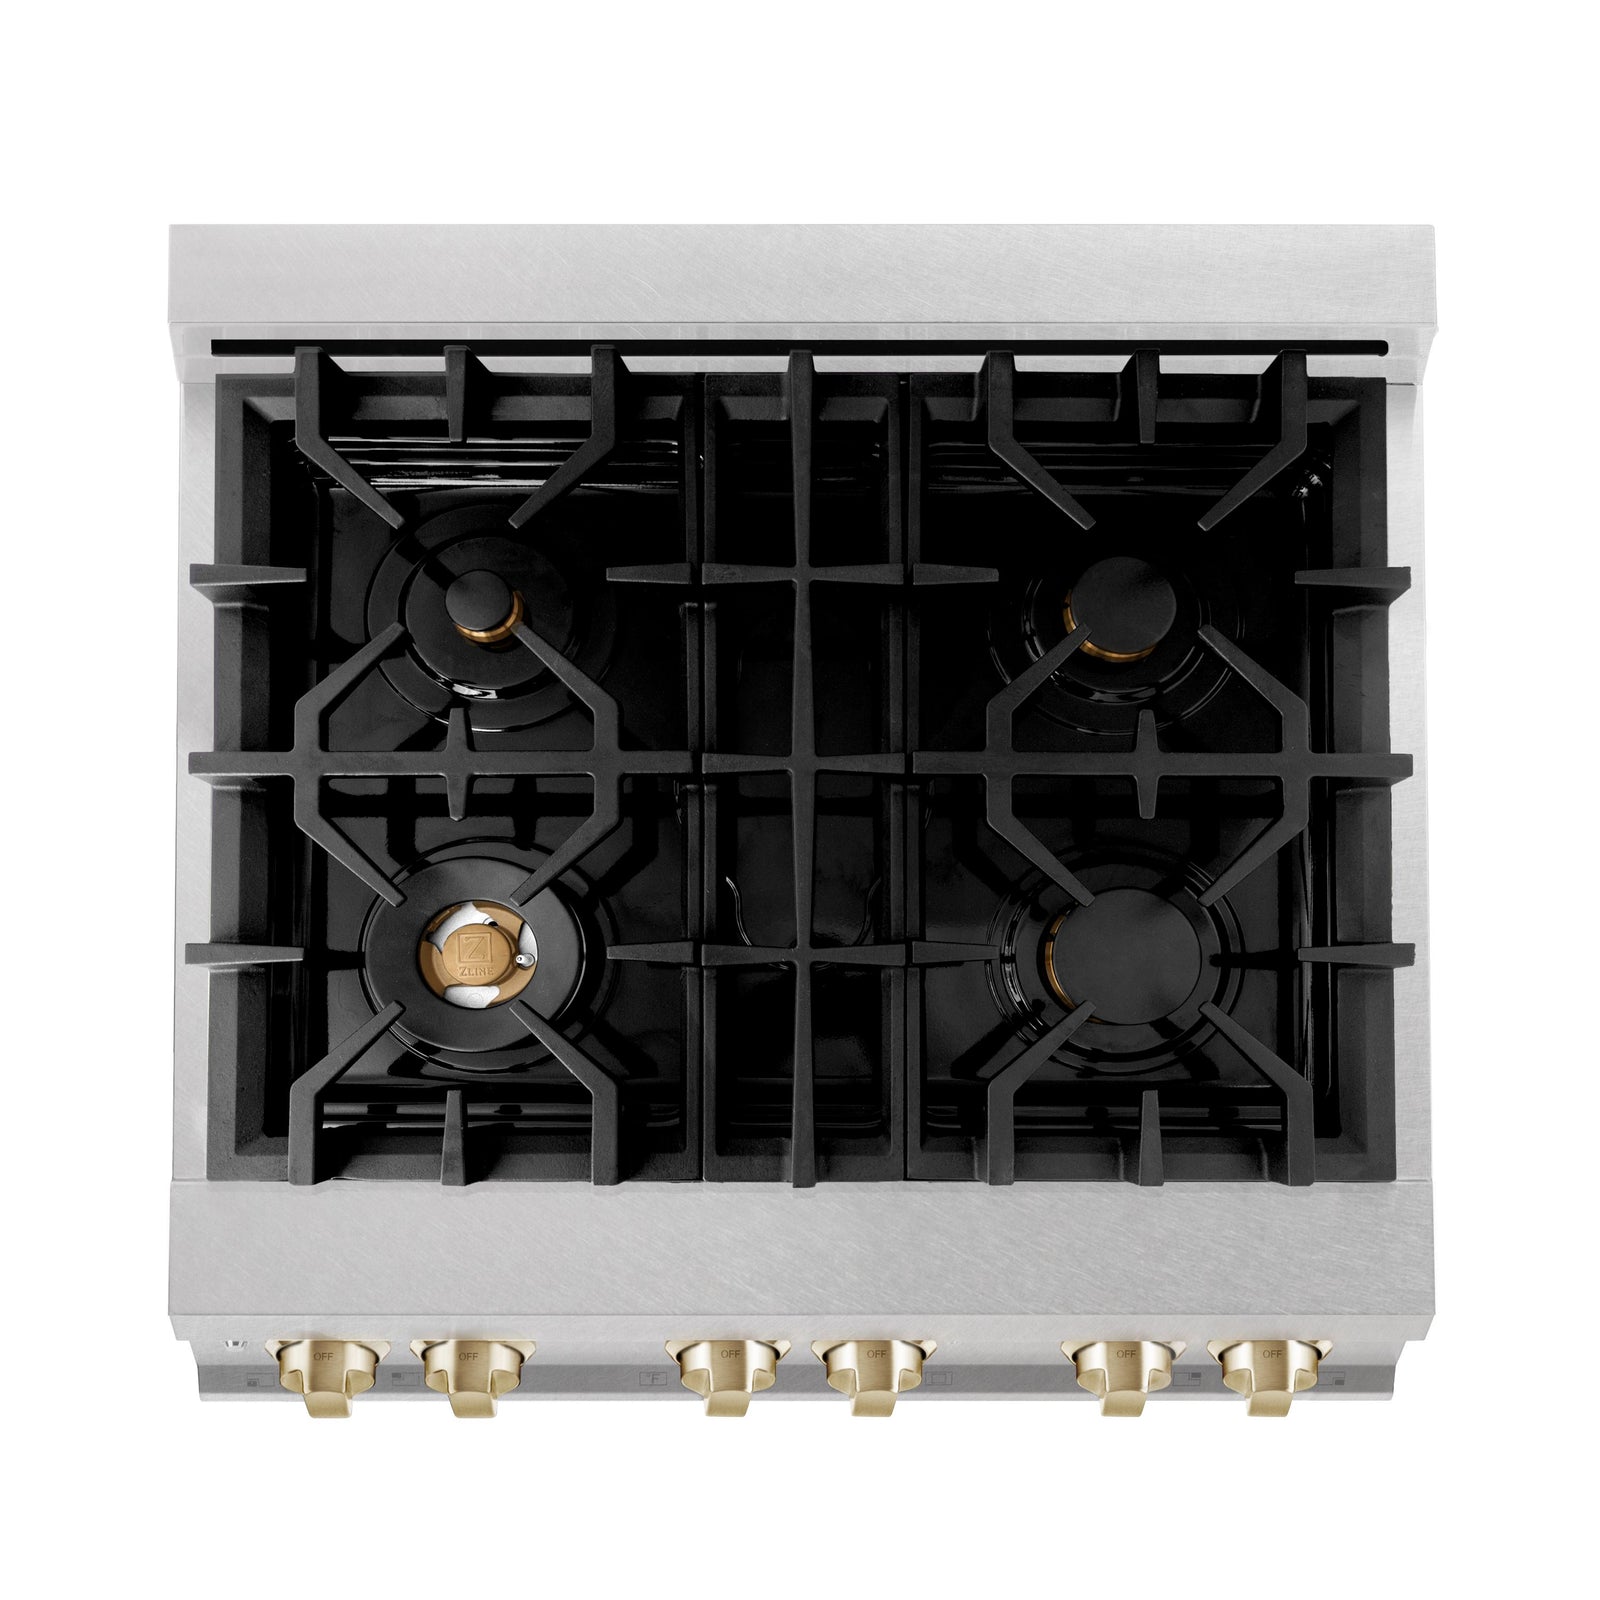 ZLINE Autograph Edition 30 in. Range with Gas Burner/Electric Oven in DuraSnow® Stainless Steel with Gold Accents, RASZ-SN-30-G - Smart Kitchen Lab